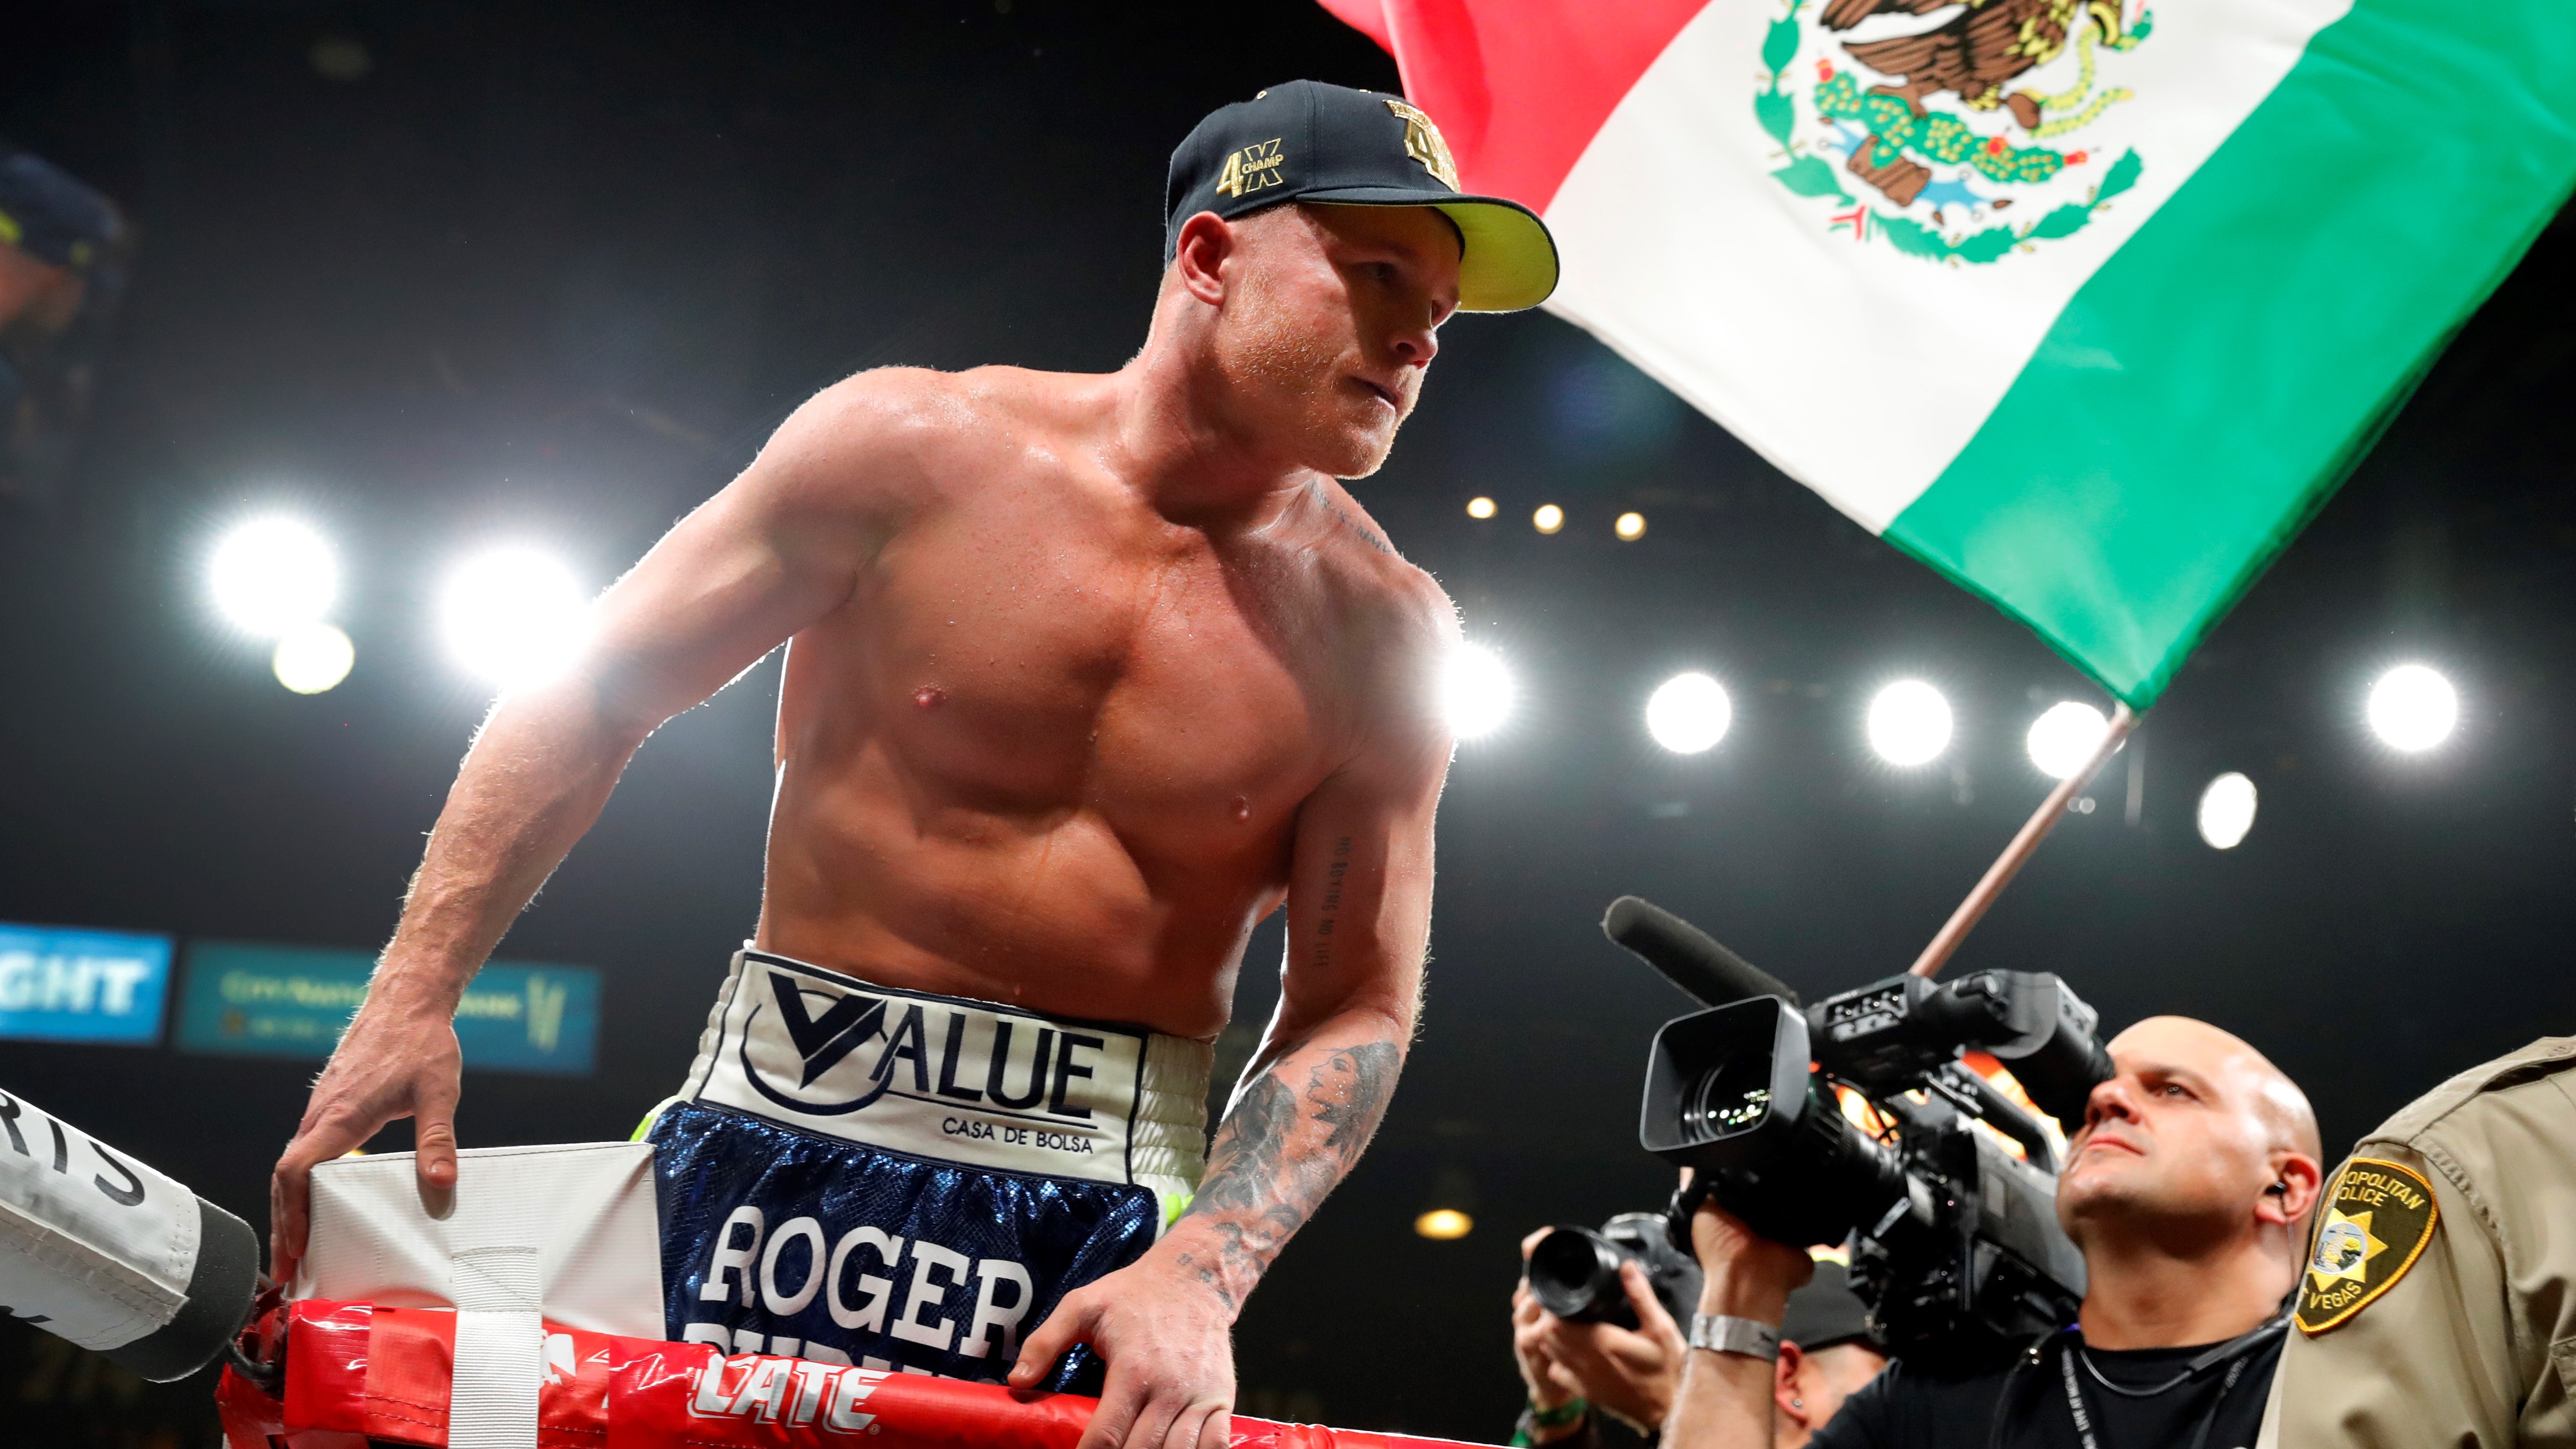 Canelo Alvarez celebrating in the ring with a Mexico flag